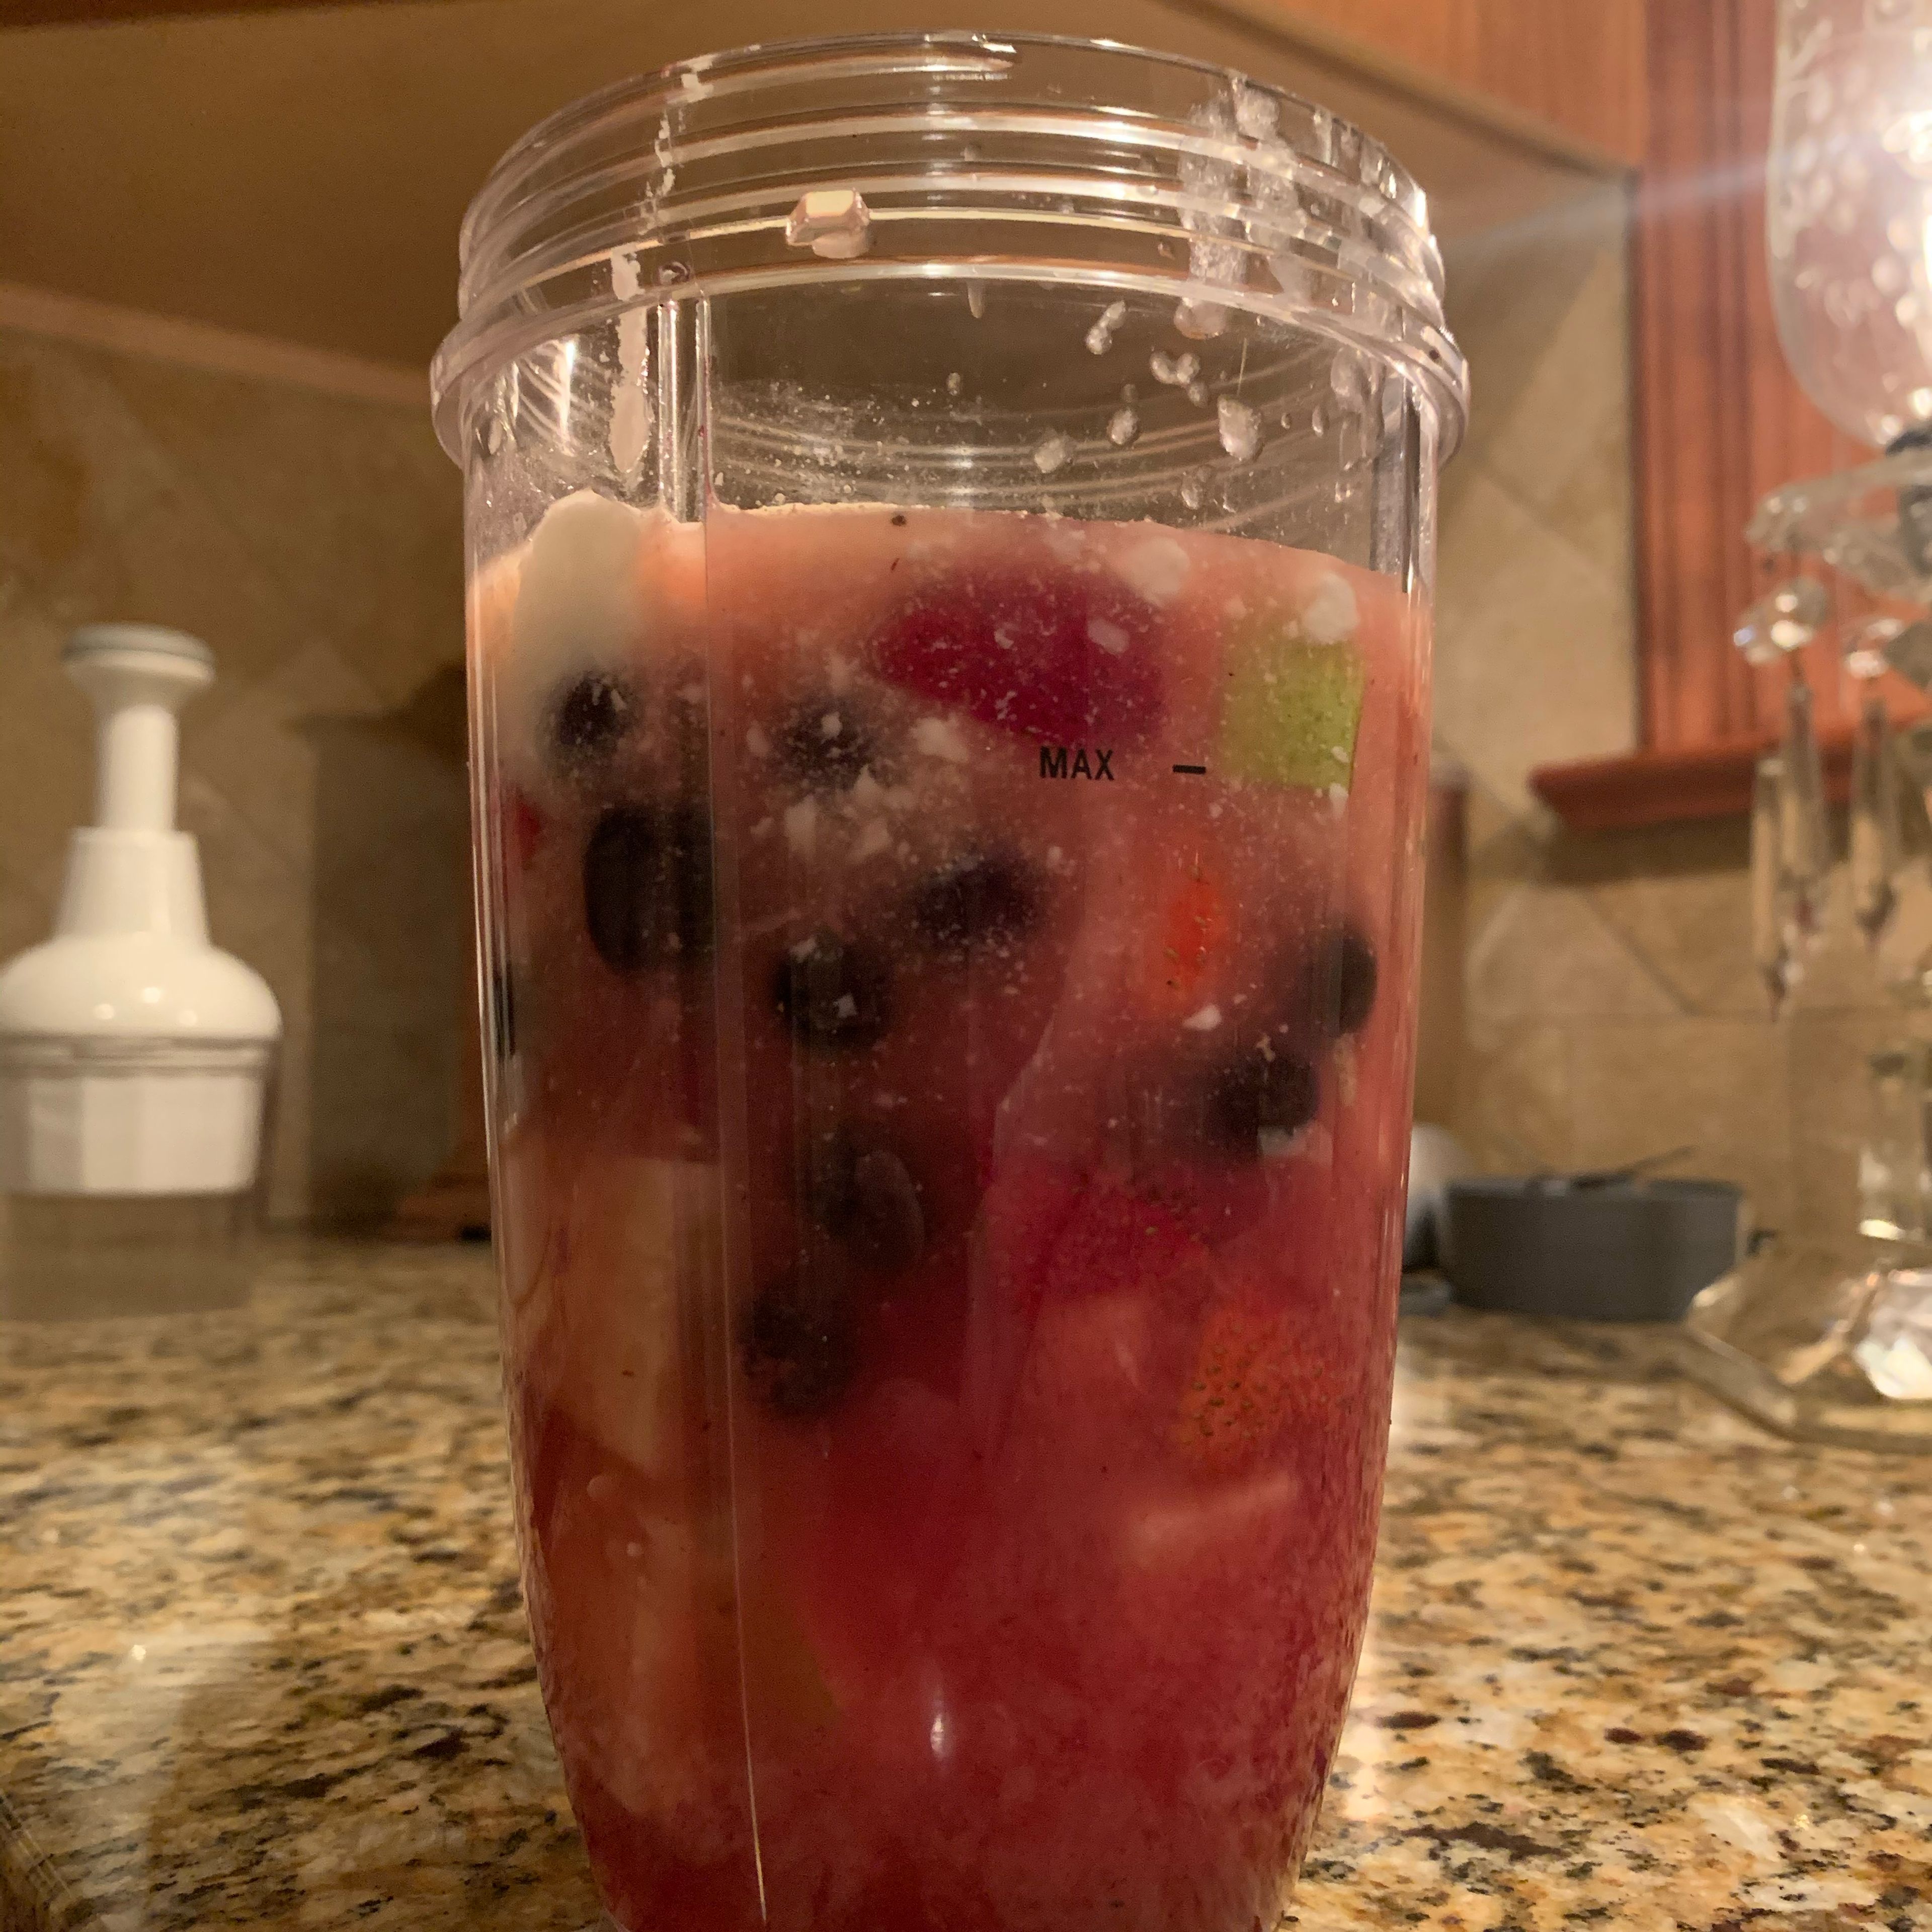 Add all ingredients to a blender or Nutribullet cup, including the fruit bowl. Add vodka in varying amount based on strength preference. 4 or 5 tablespoons typically makes for a medium to strong drink. Blend mixture.